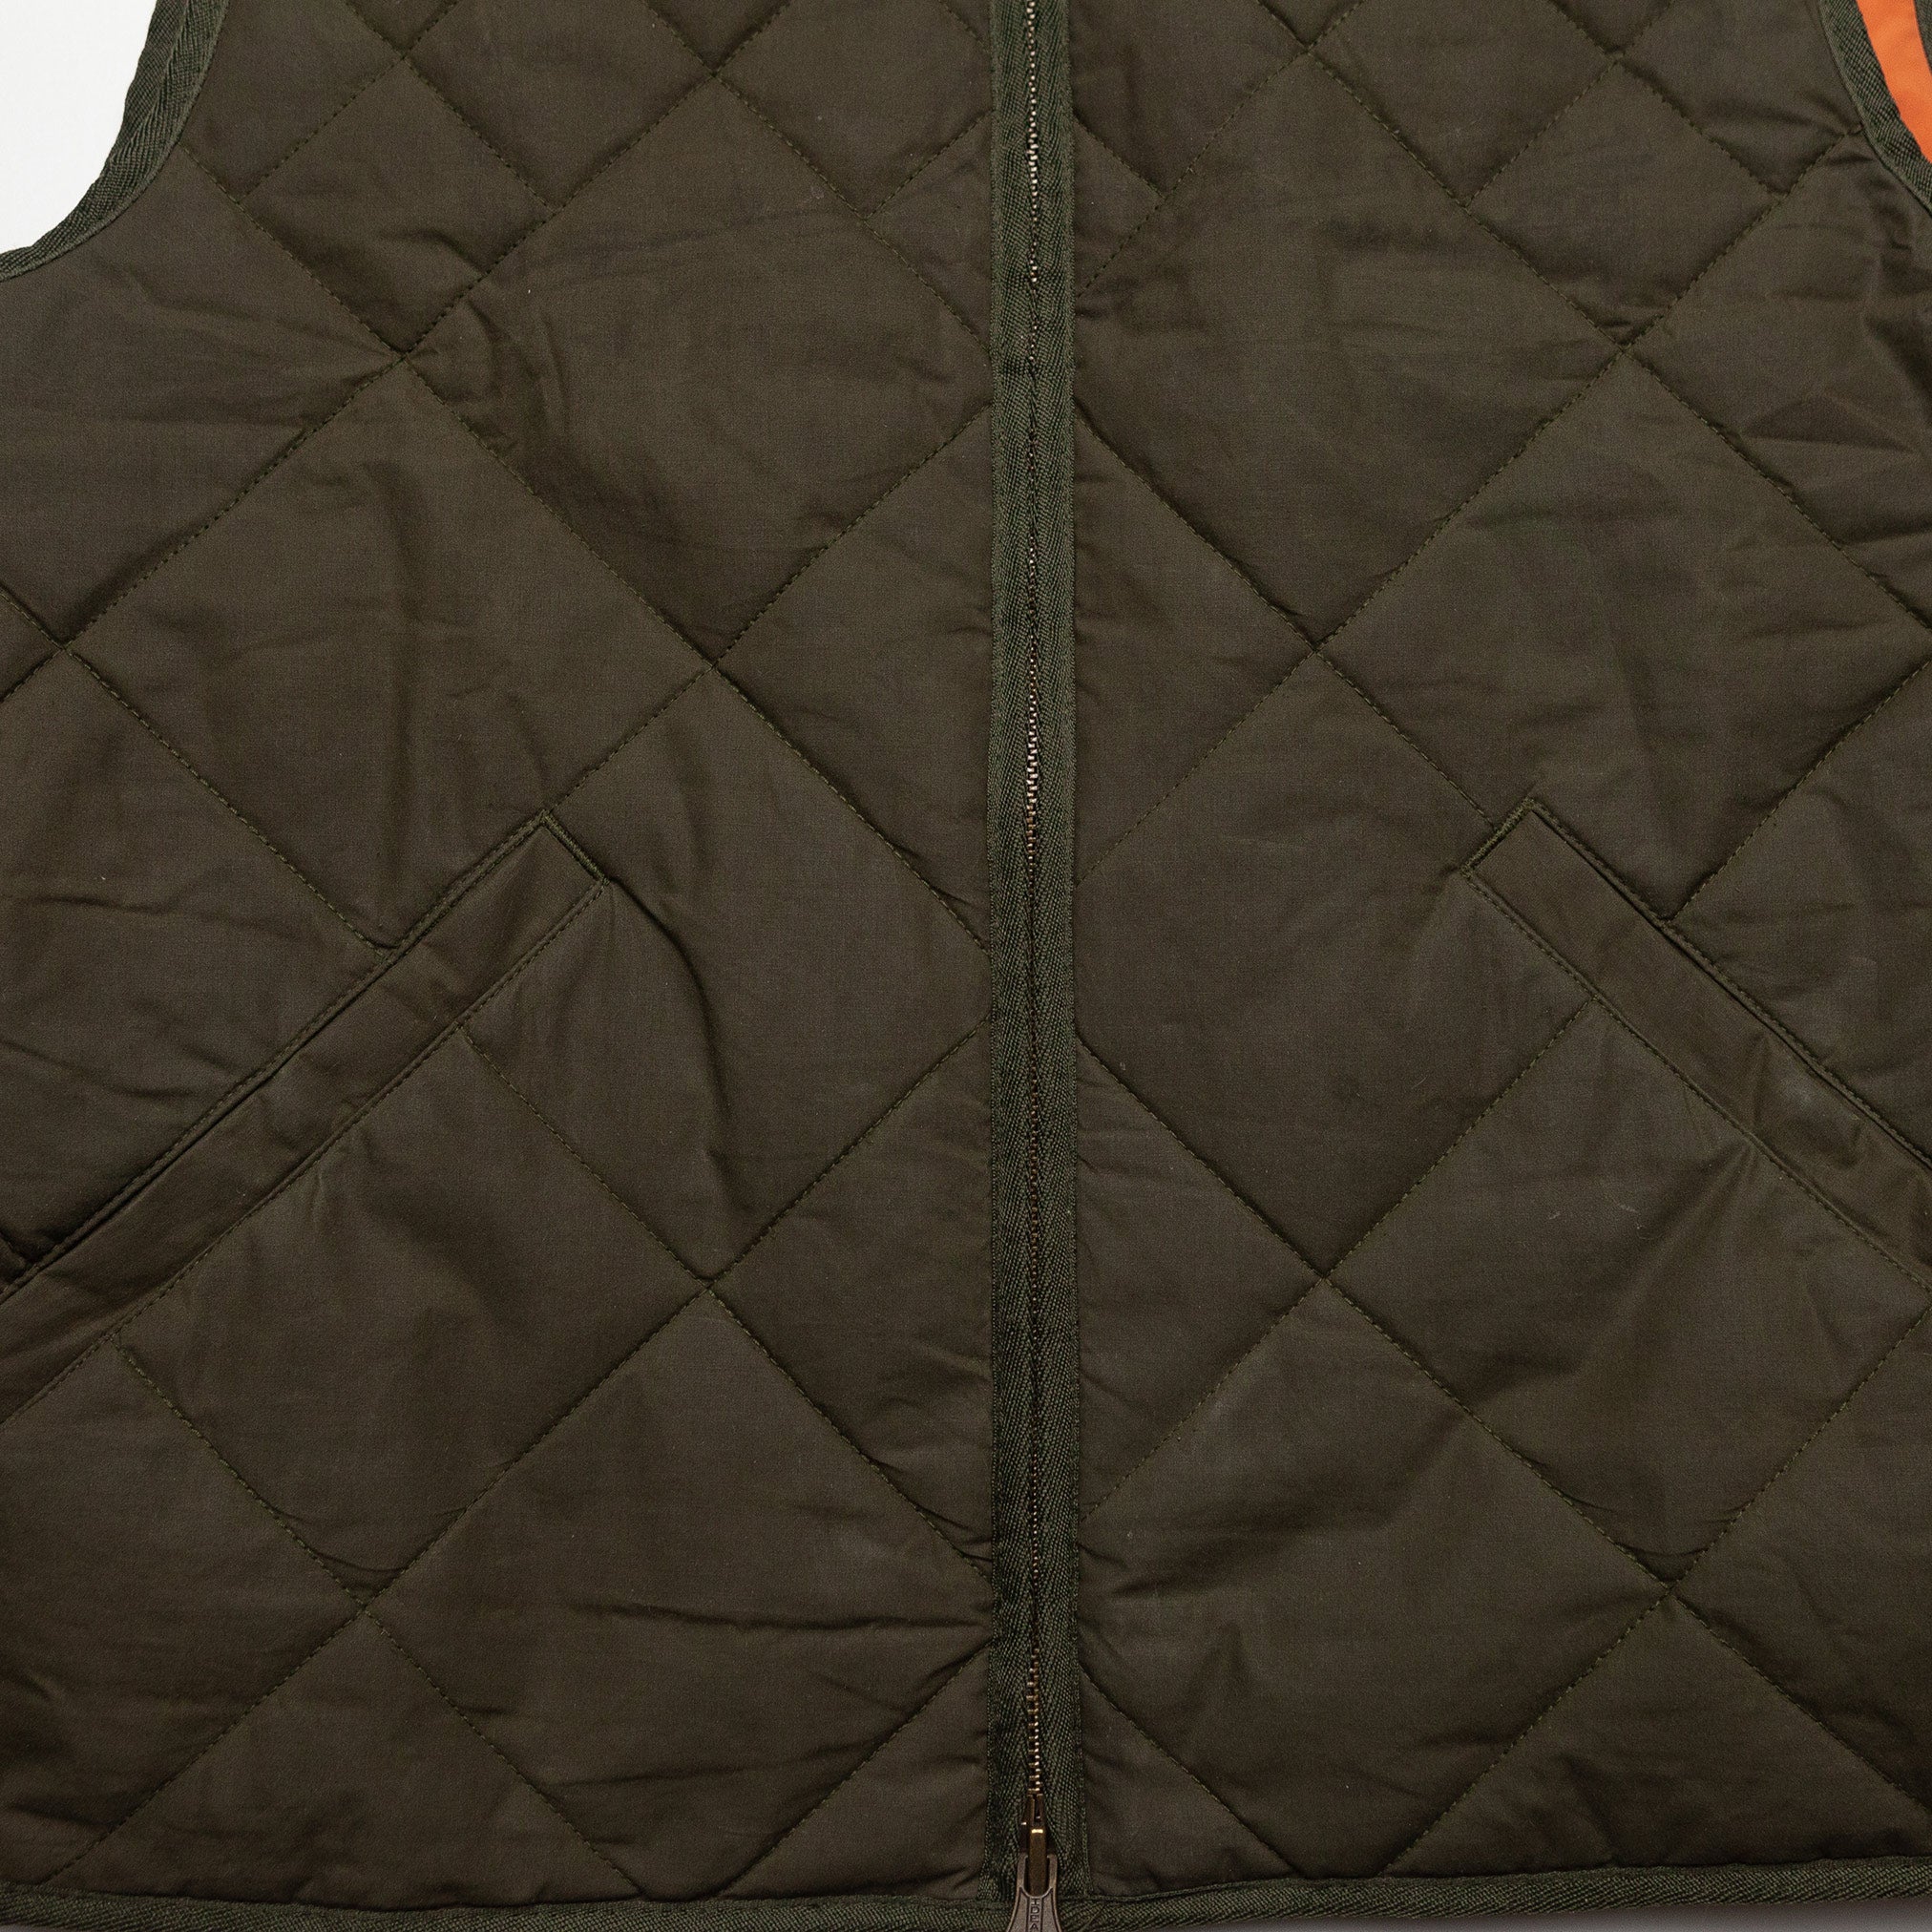 The Quilted Bomber Vest in Olive Dry Wax - M/40